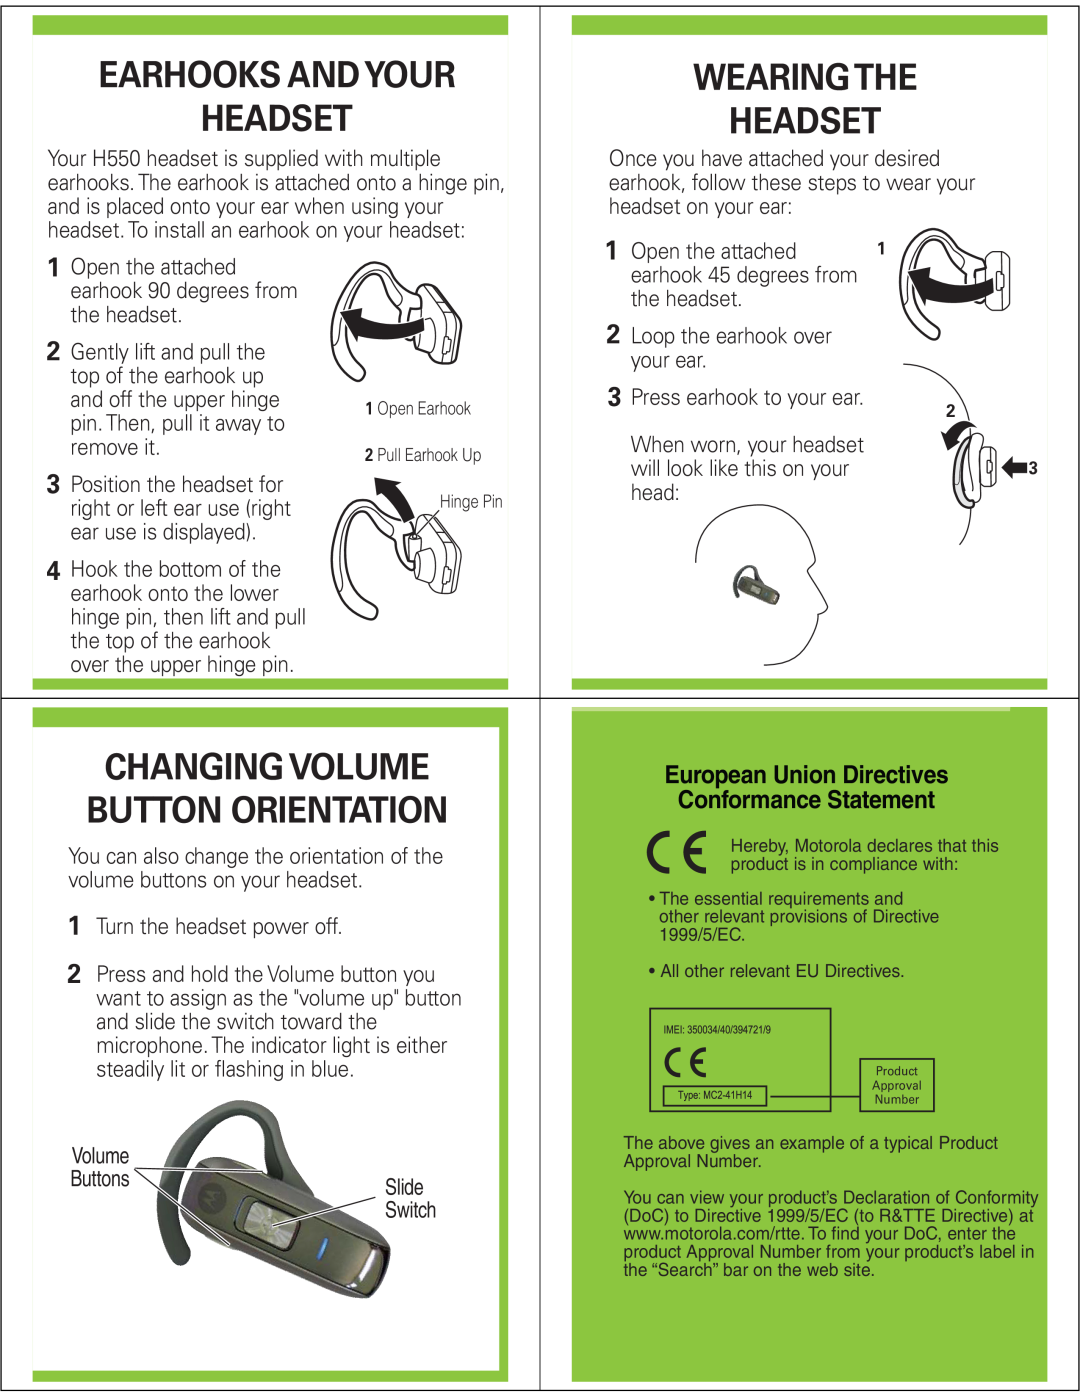 Motorola H550 Earhooks And Your, Wearing The, Headset, Changing Volume, Button Orientation, European Union Directives 